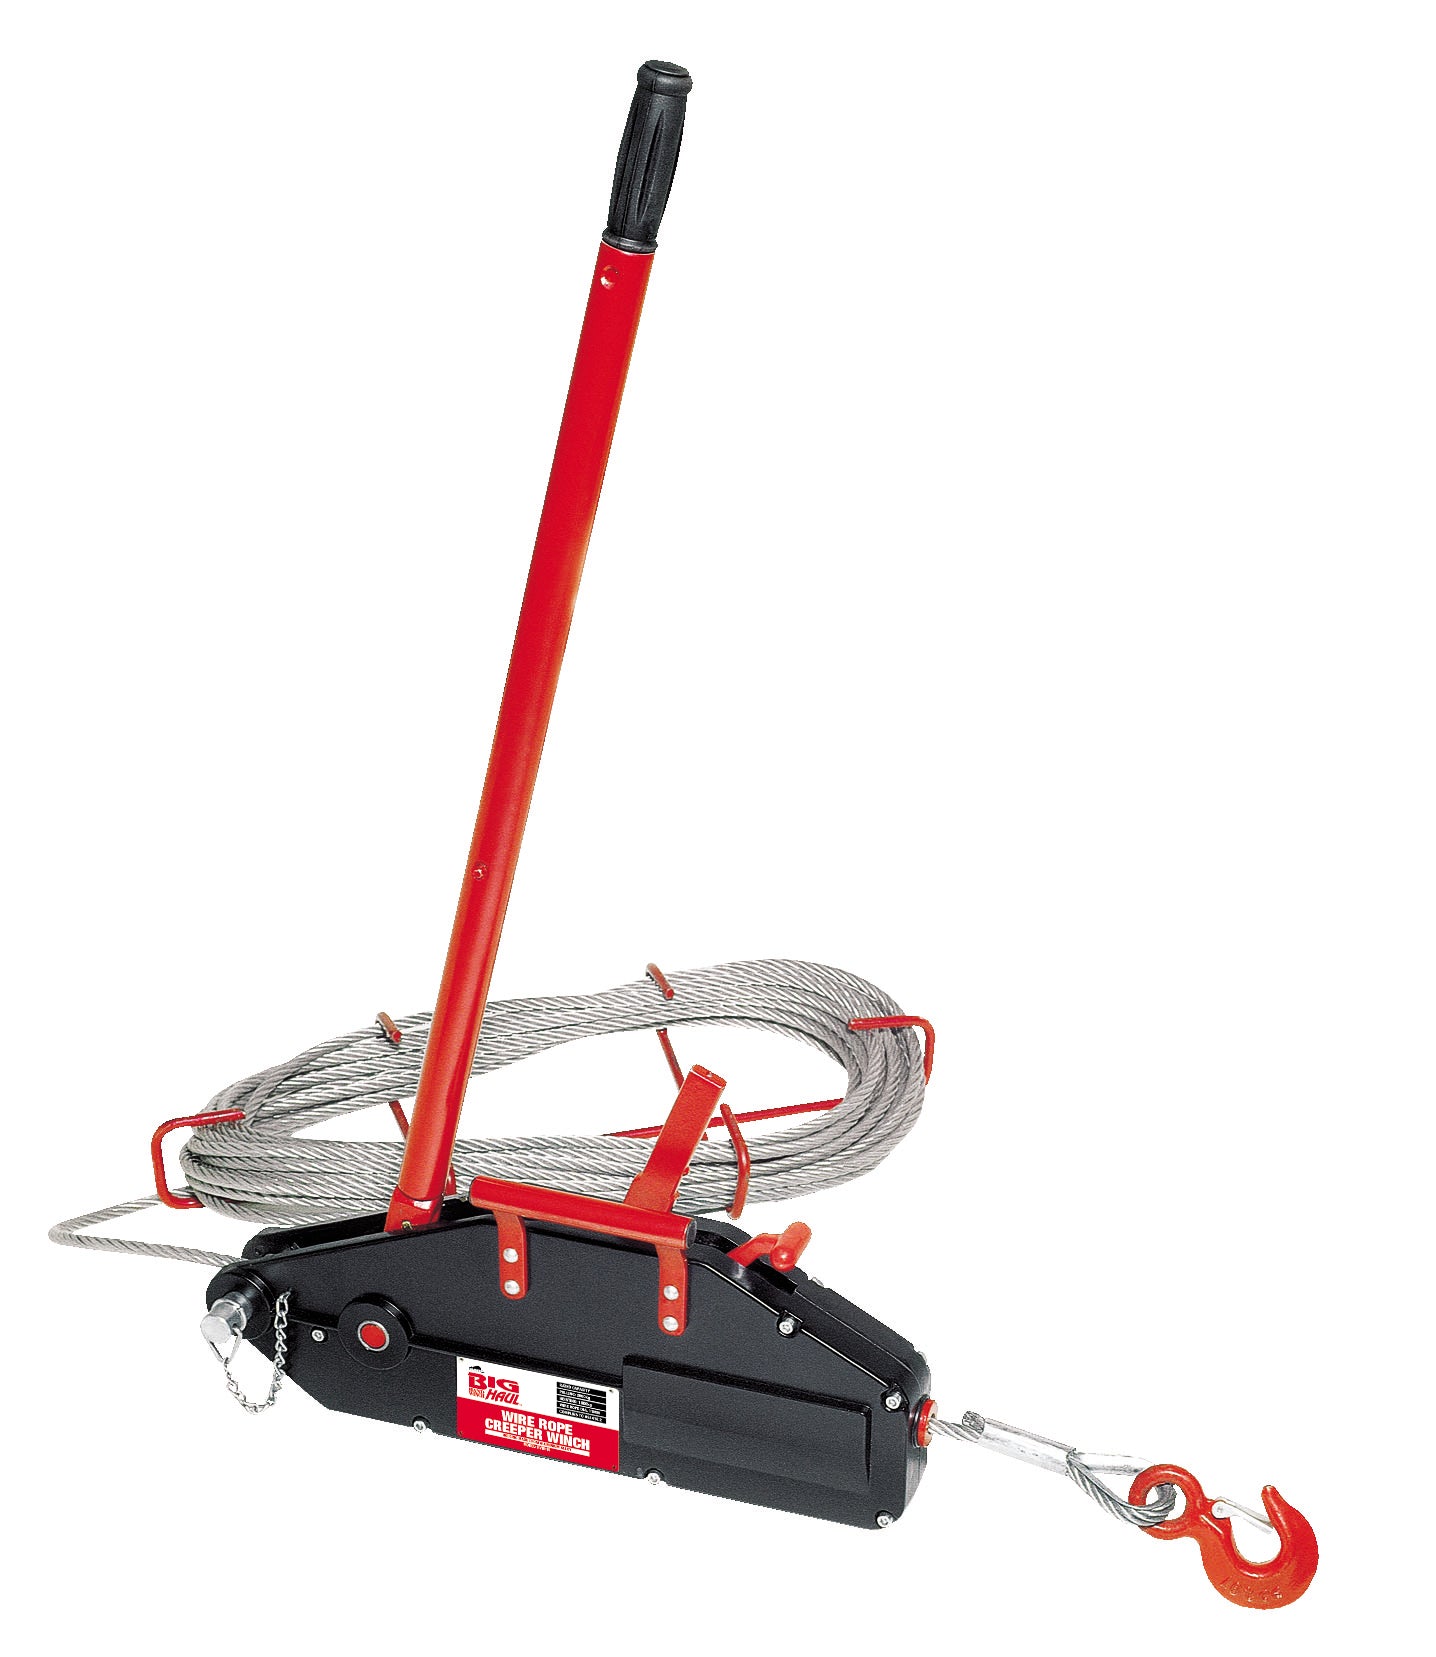 <p>Model Bighaul-C/w 20m of Wire Rope. Complies to AS 1418.2 Compact High Strength Aluminium Alloy Housing.</p> <p>A versatile portable and compact creeper winch for pulling, lifting, lowering, spanning, 4WD recovery and securing loads over large distance.&nbsp;</p>